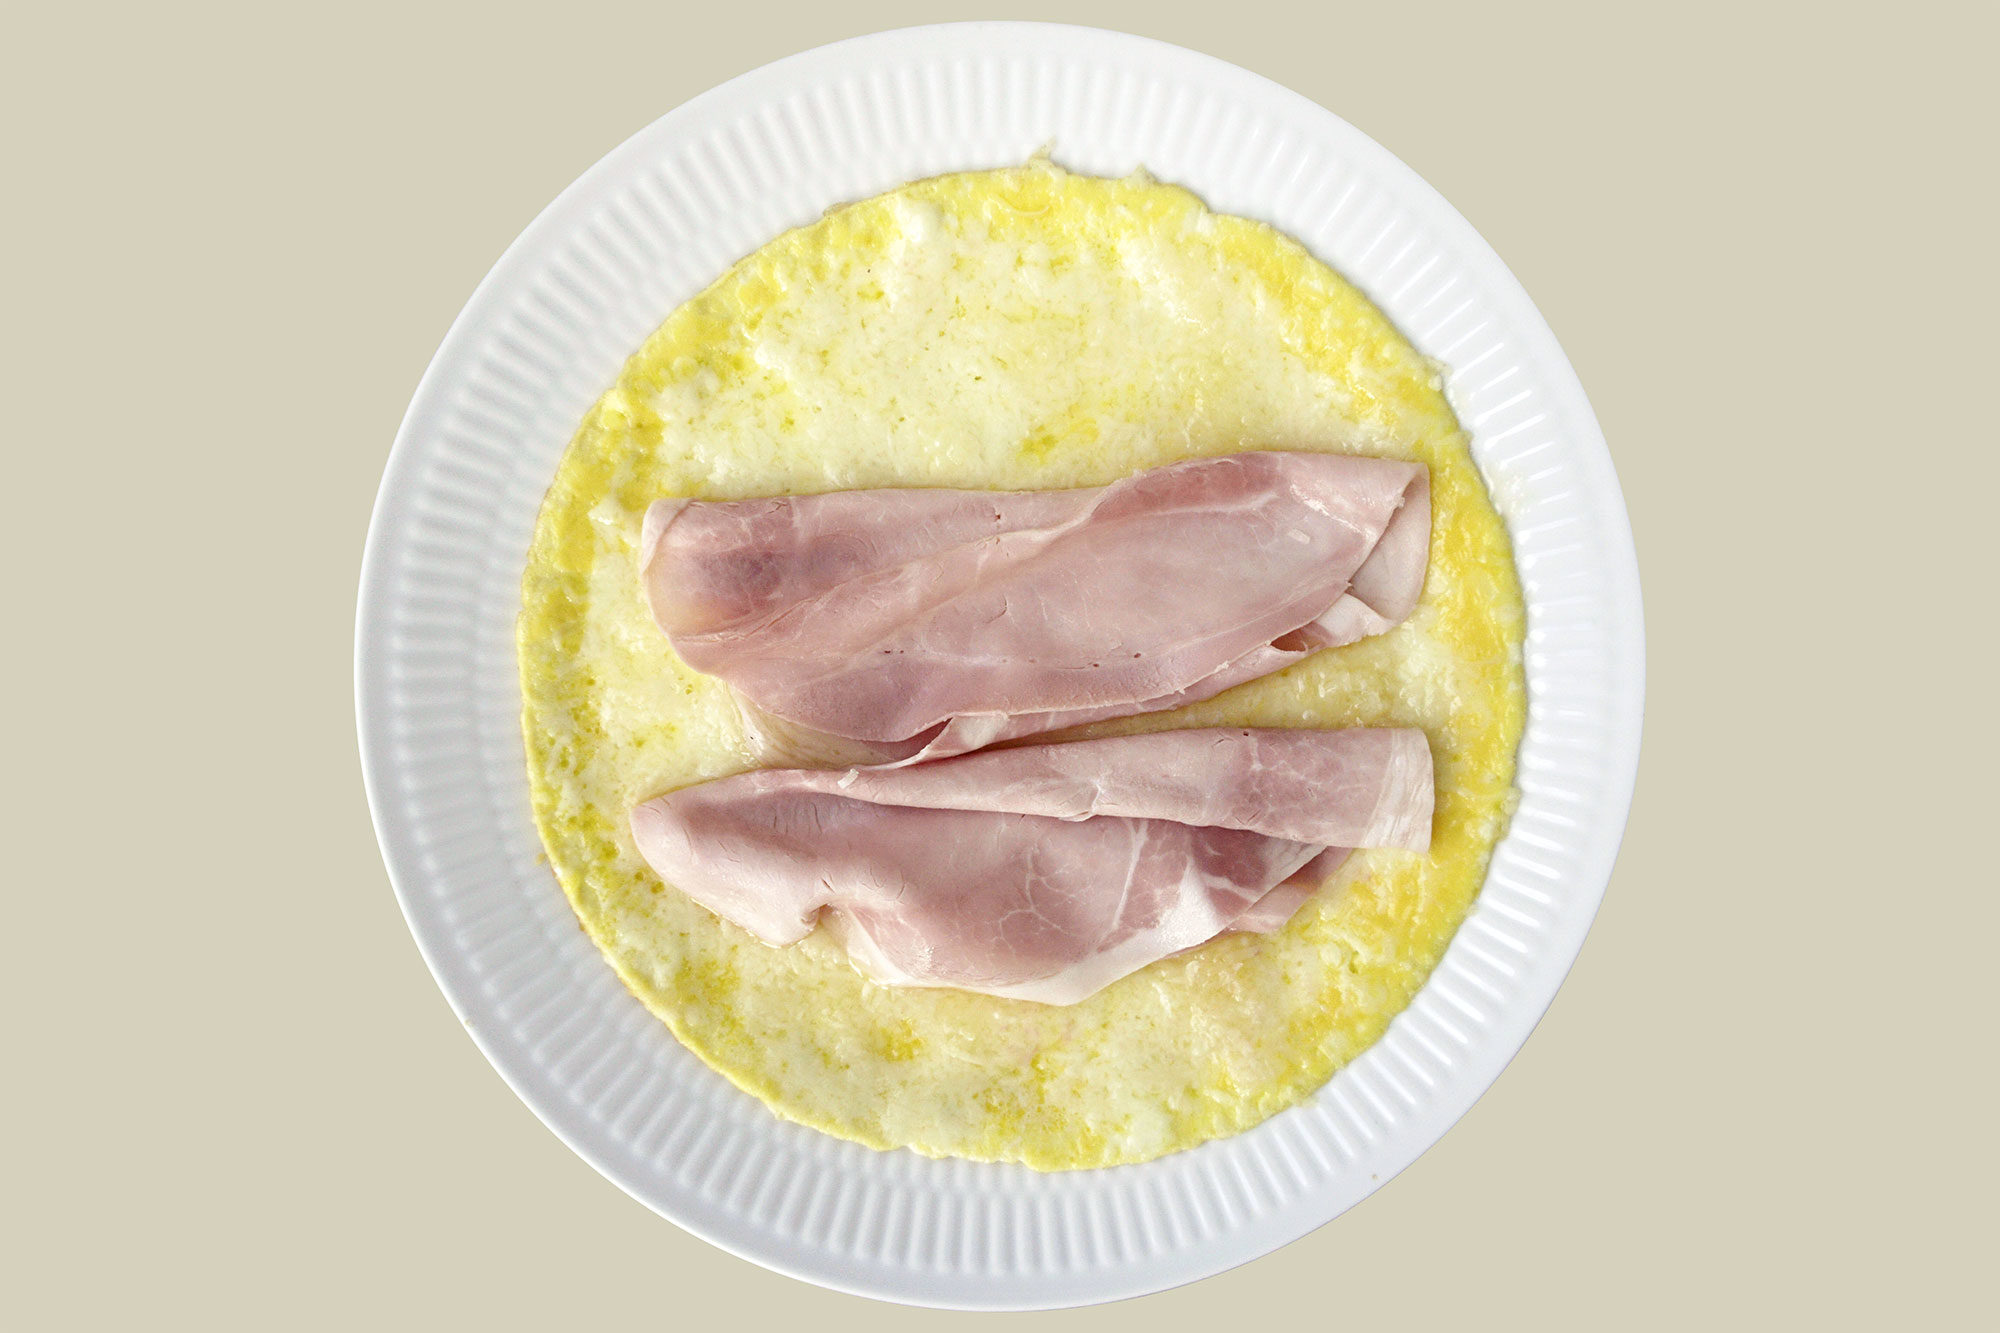 Lord Hamton: The Classic Ham & Cheese Omelet